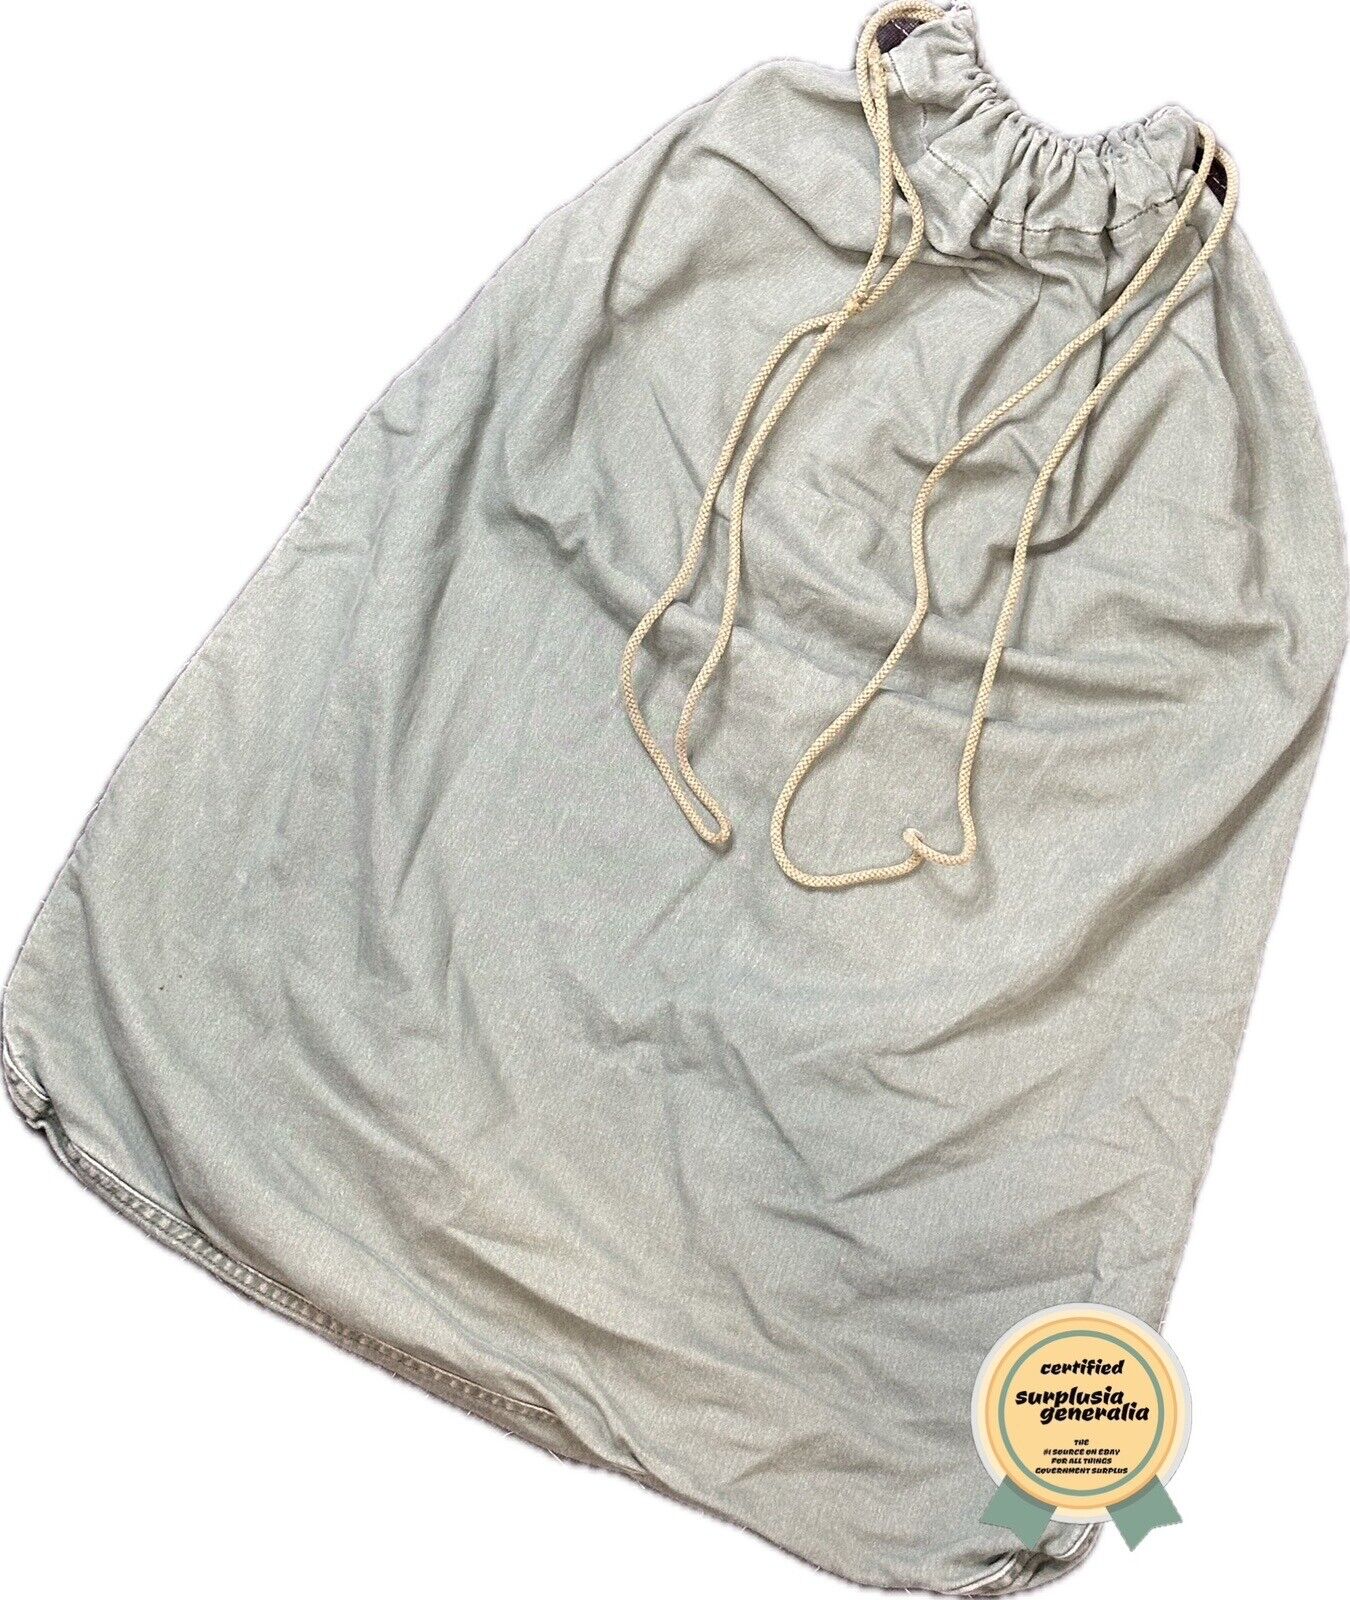 US Army Issue Barracks Bag 100% Cotton Extra Large Laundry Bags in OD/Green